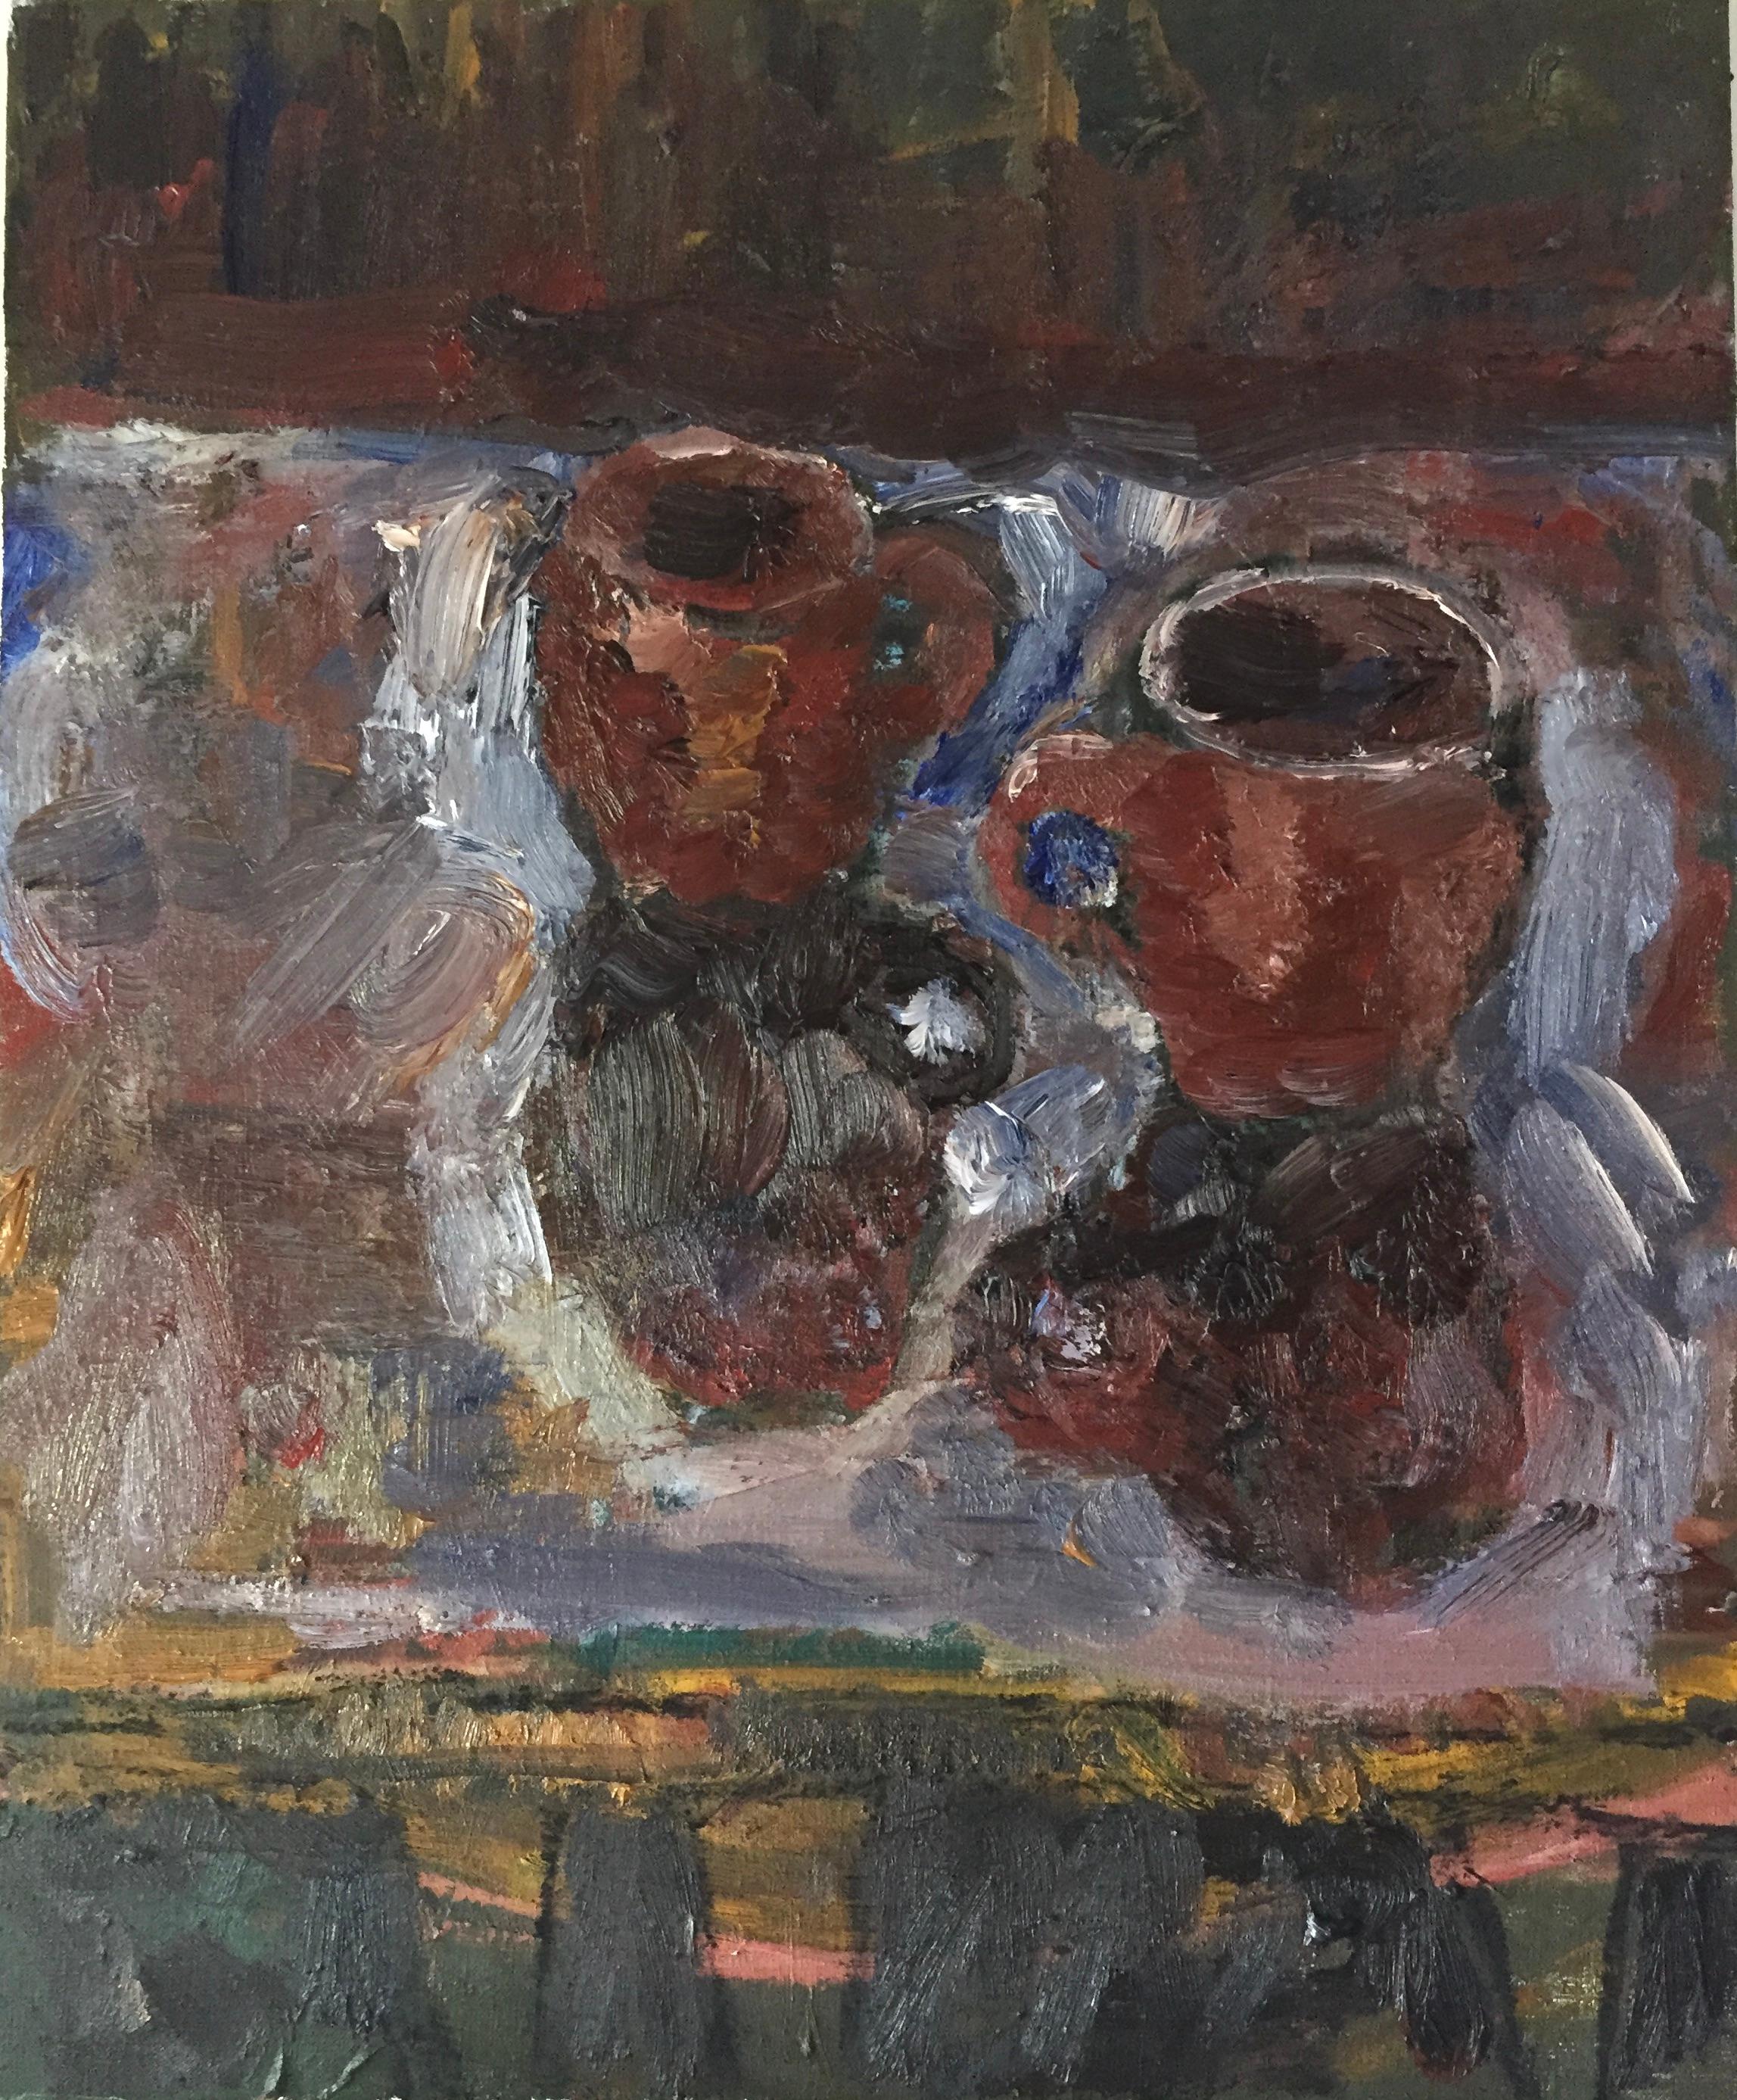 ZEBEDEE JONES Abstract Painting - 'STILL LIFE TWO MUGS', 2020 Oil on board 51 x 61 cm Signed and dated verso